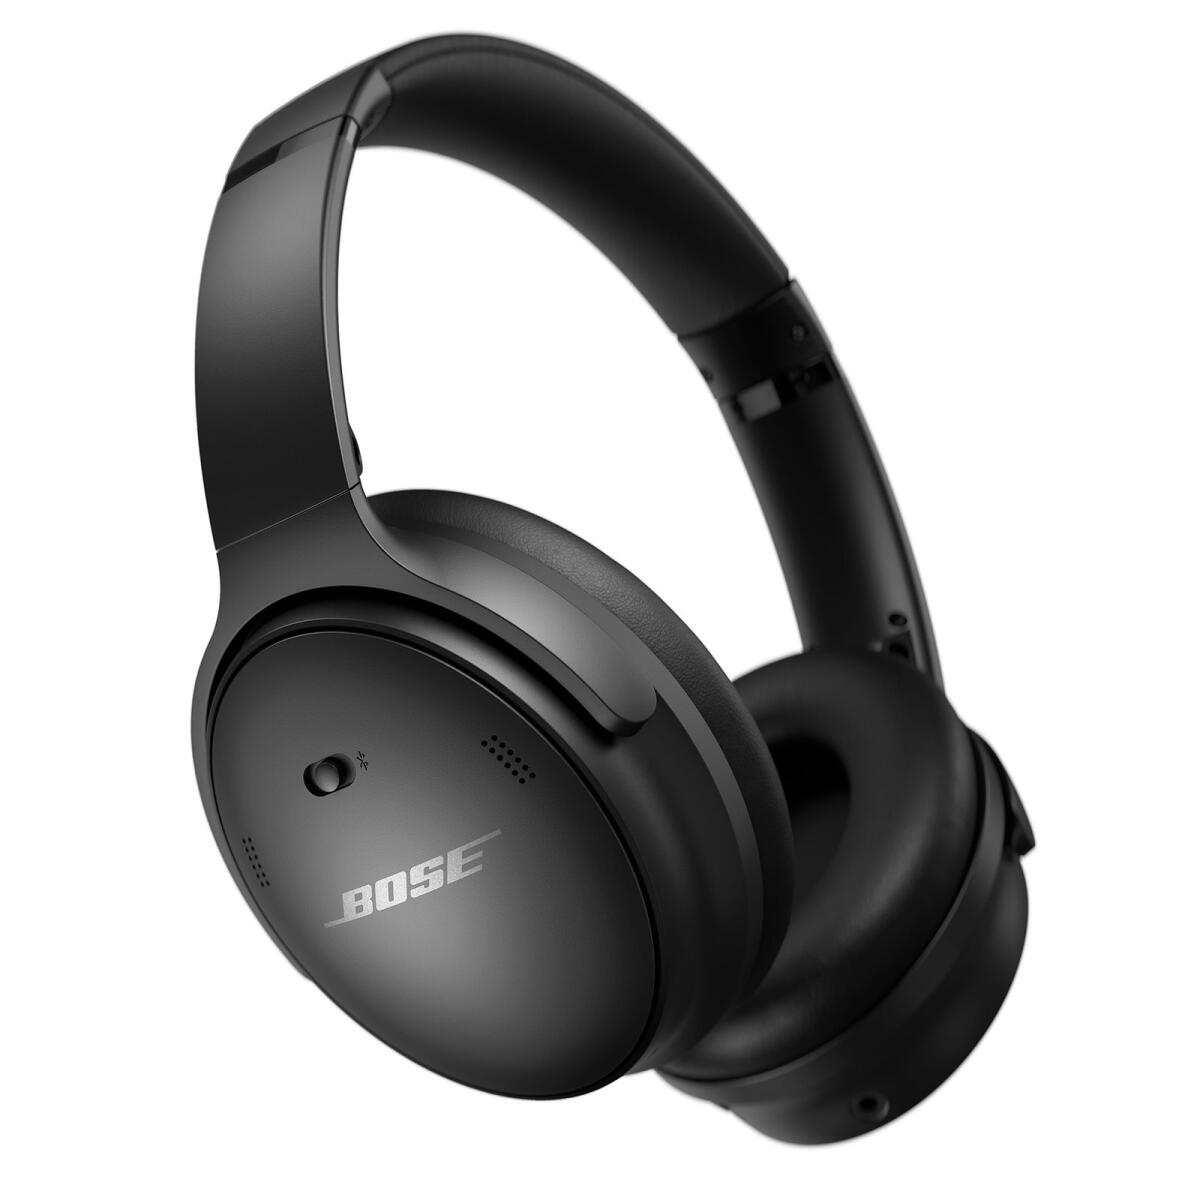 The Bose QuietComfort 45 is compatible with a wide range of devices, from smartphones and tablets to laptops and game consoles, making it a versatile choice for all your audio needs.